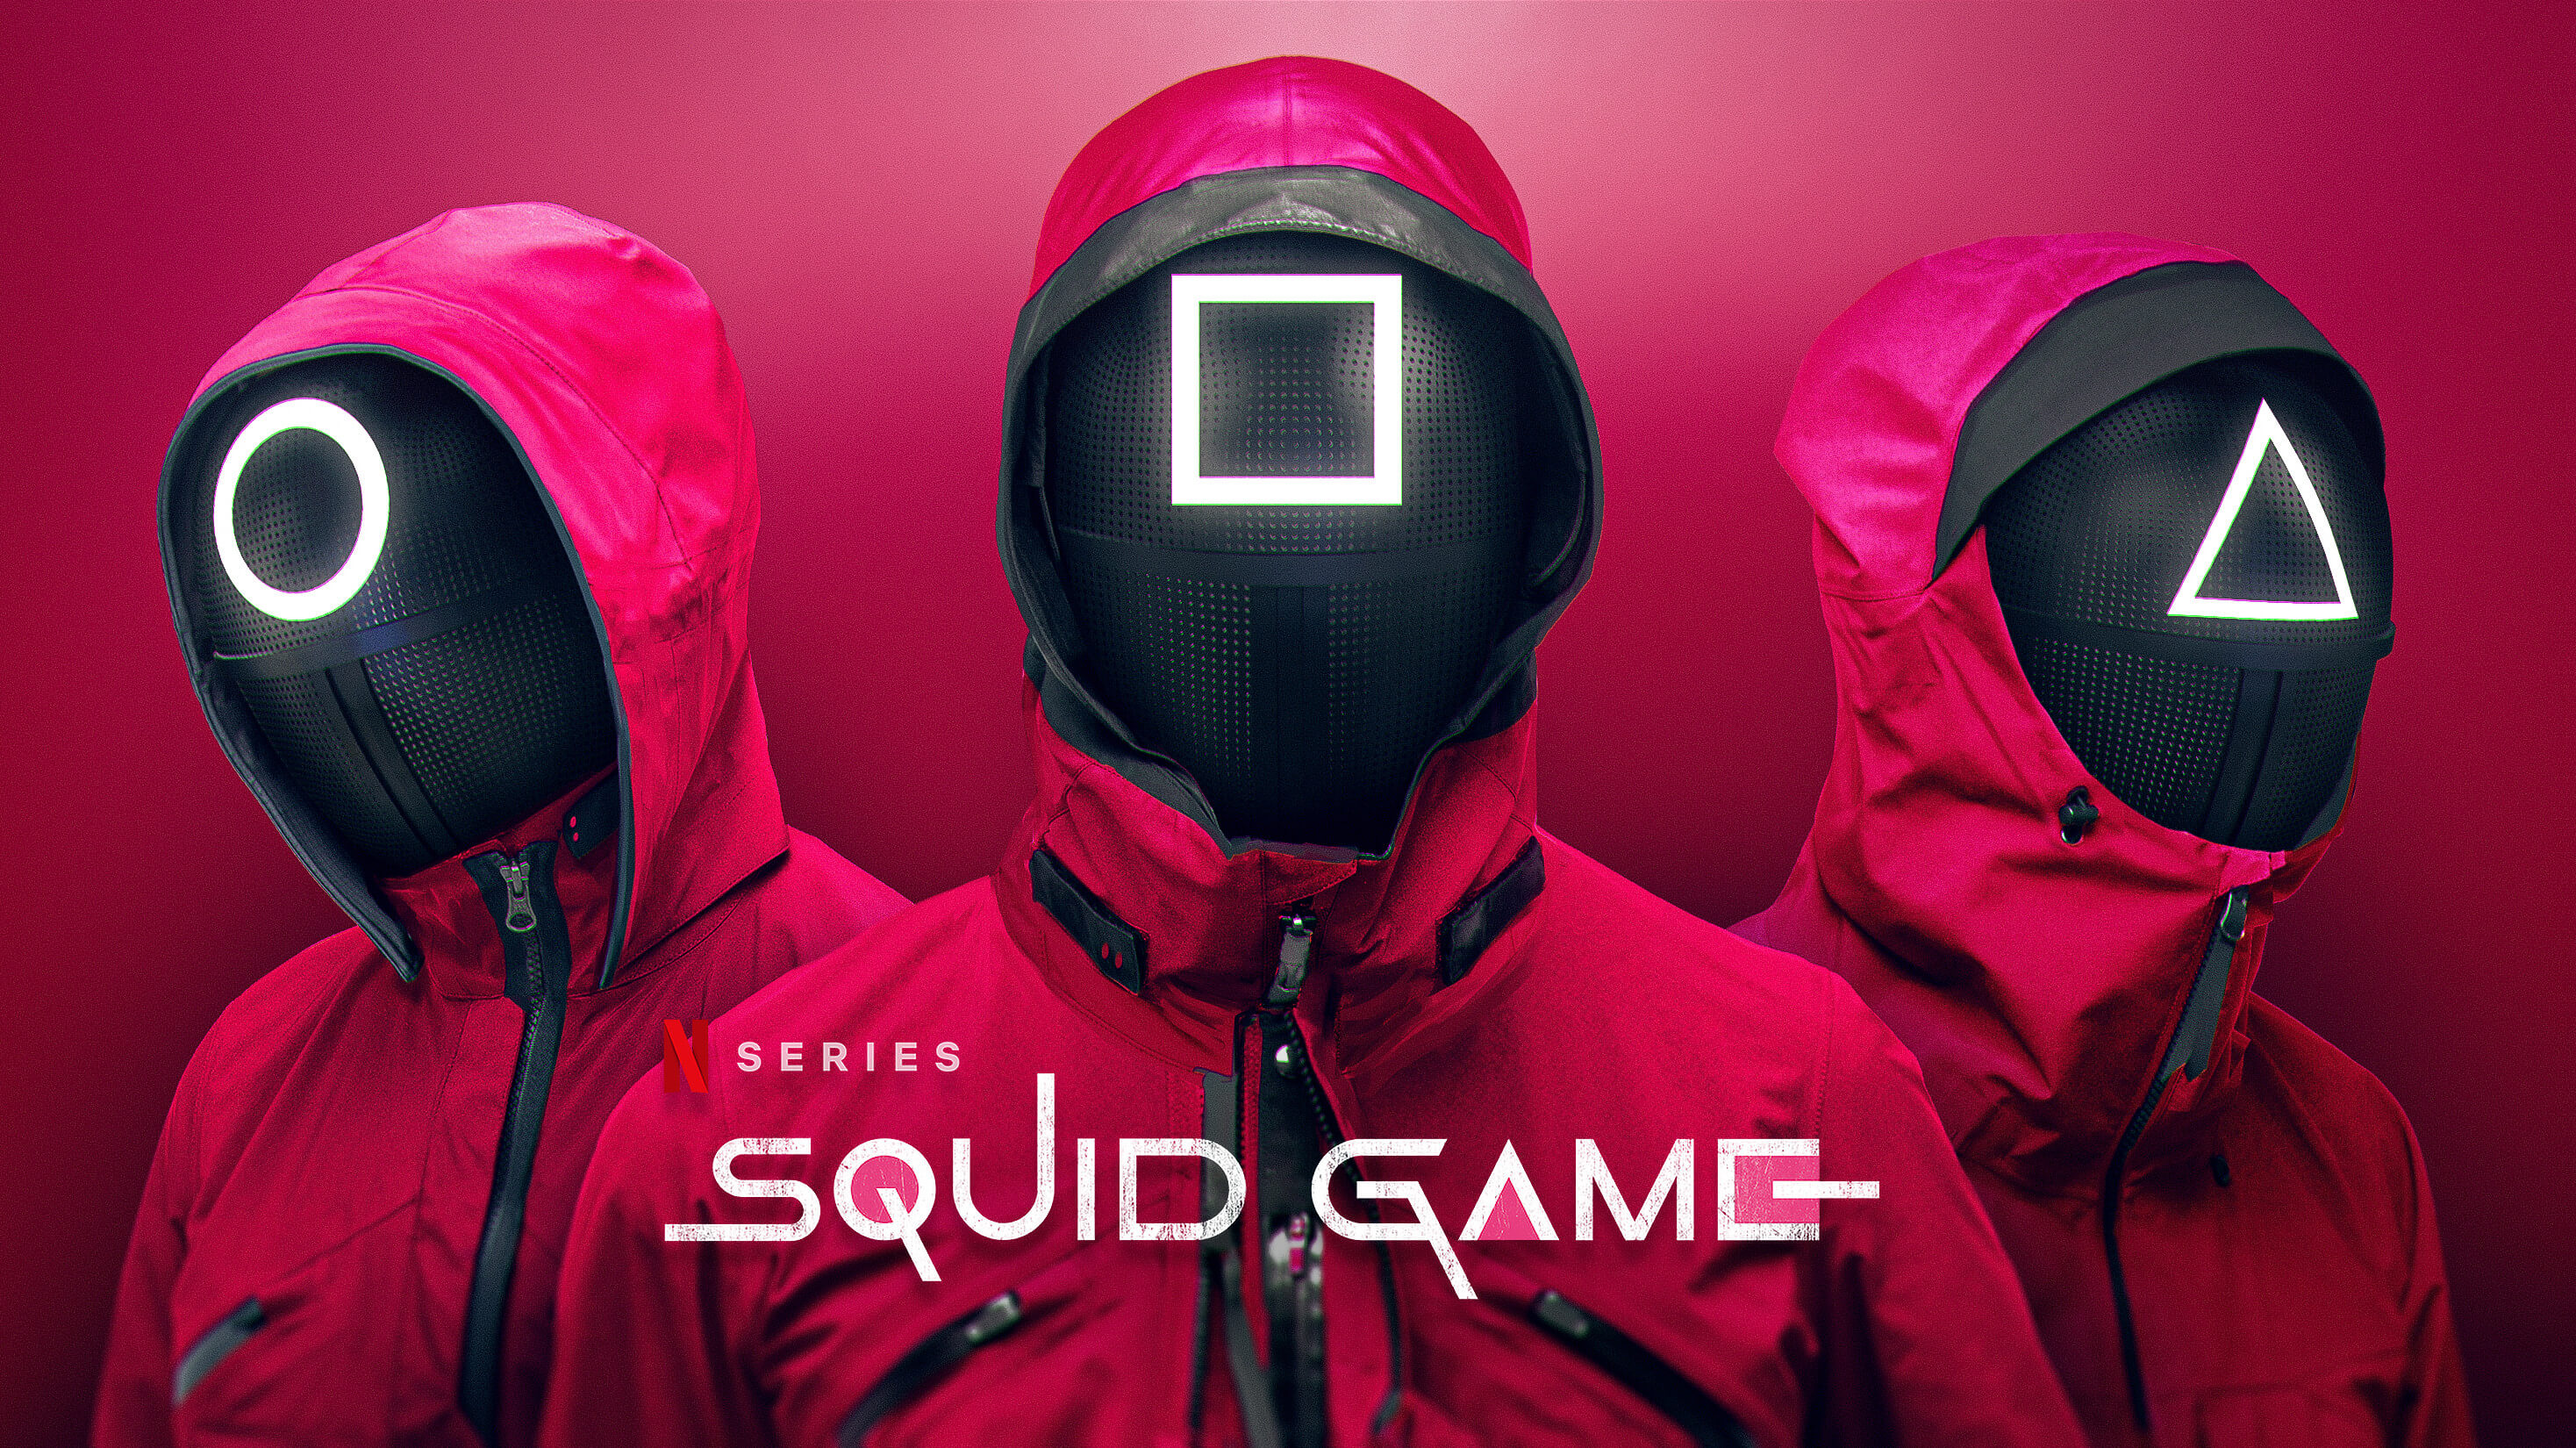 Why is Squid Game such an international success? » Dramabeans